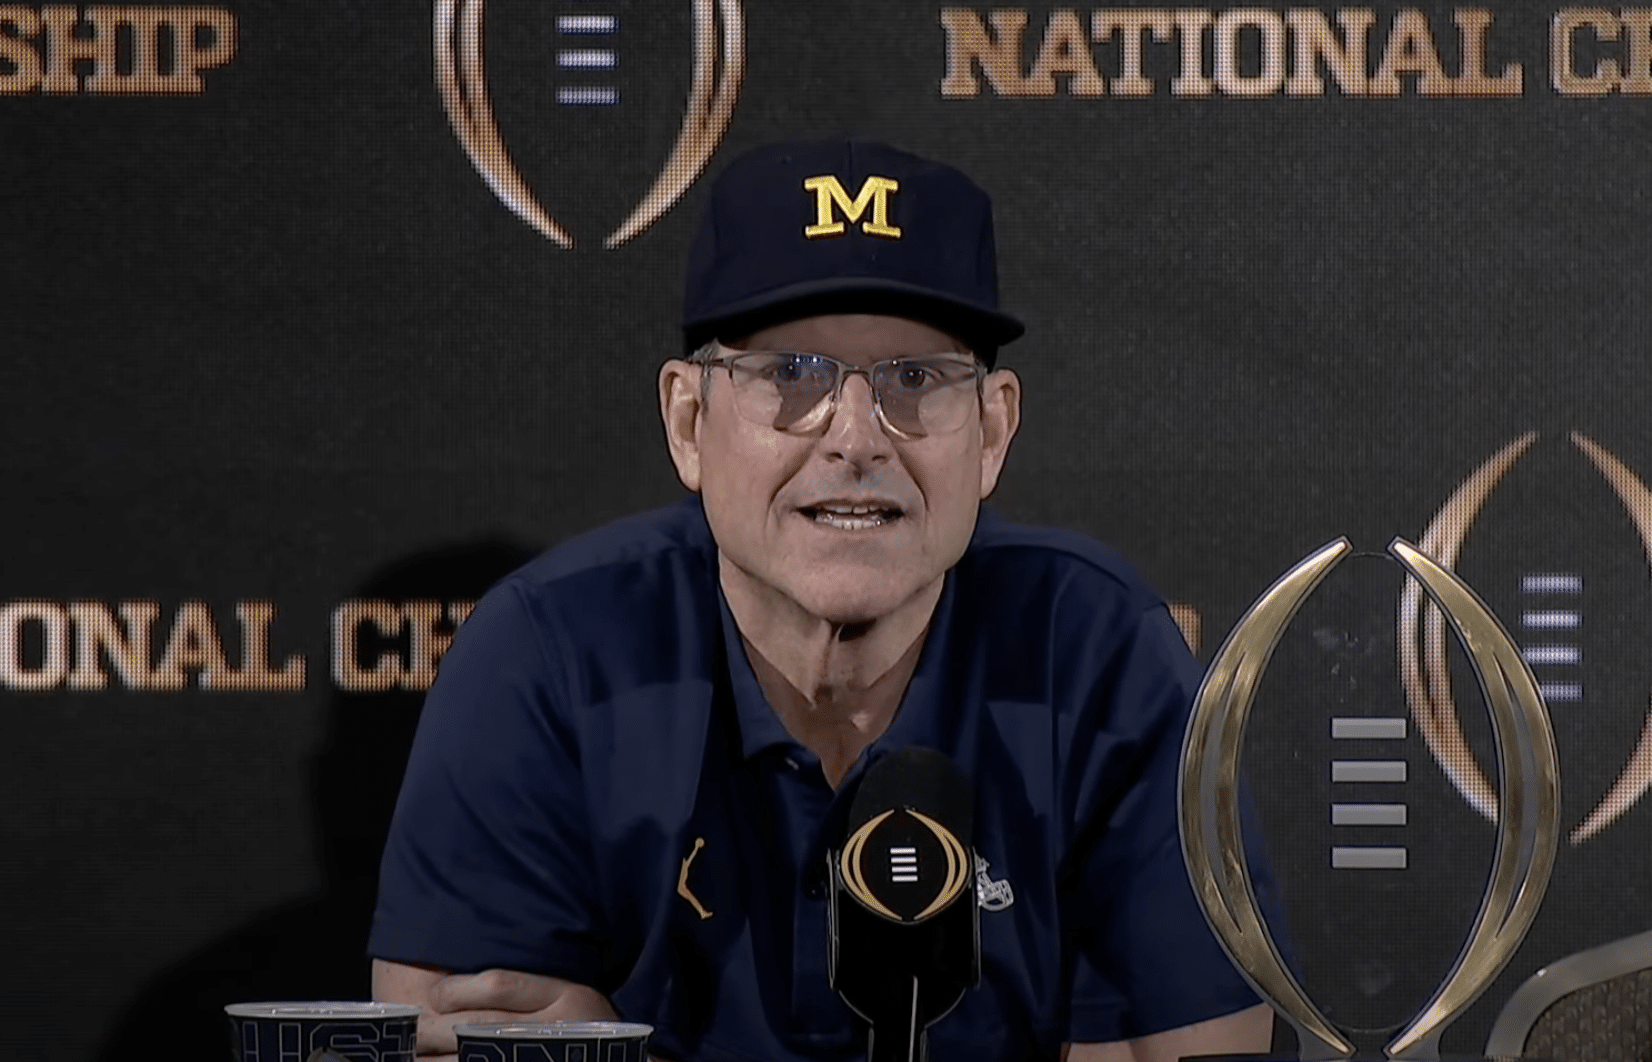 Jim Harbaugh reveals tattoo he will get NCAA President weighs in on fairness of Michigan Michigan head coach Jim Harbaugh lands interview Jim Harbaugh coaching odds Jim Harbaugh to meet